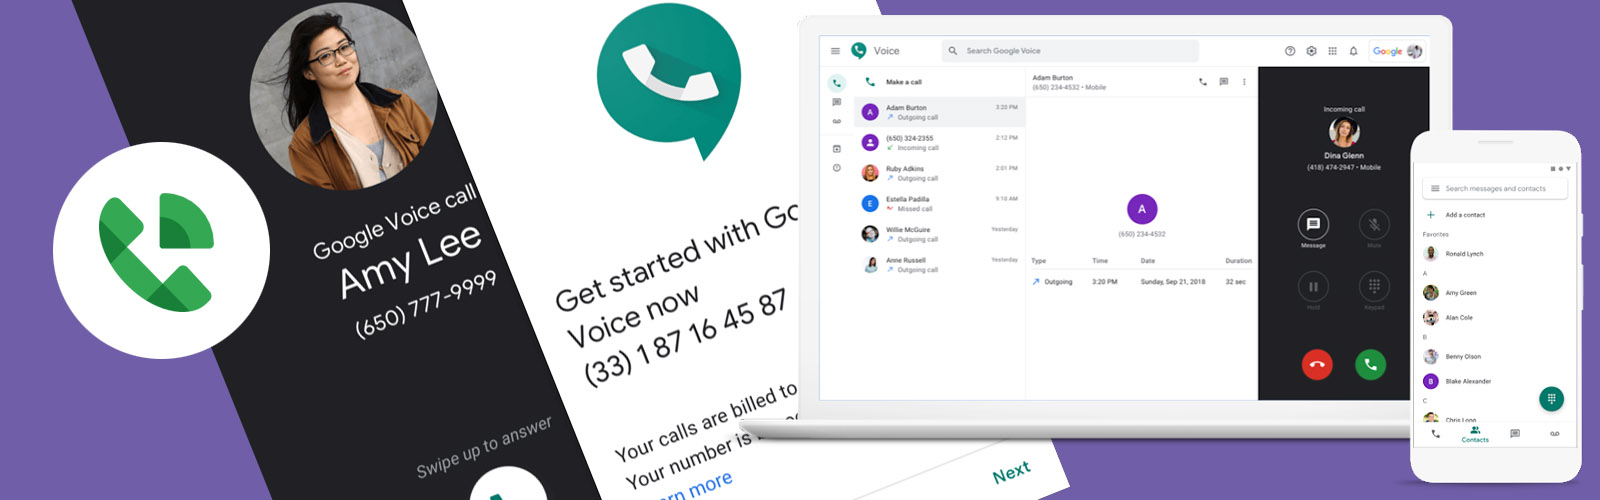 Screen shots of Google Voice for Business being used on a laptop and mobile